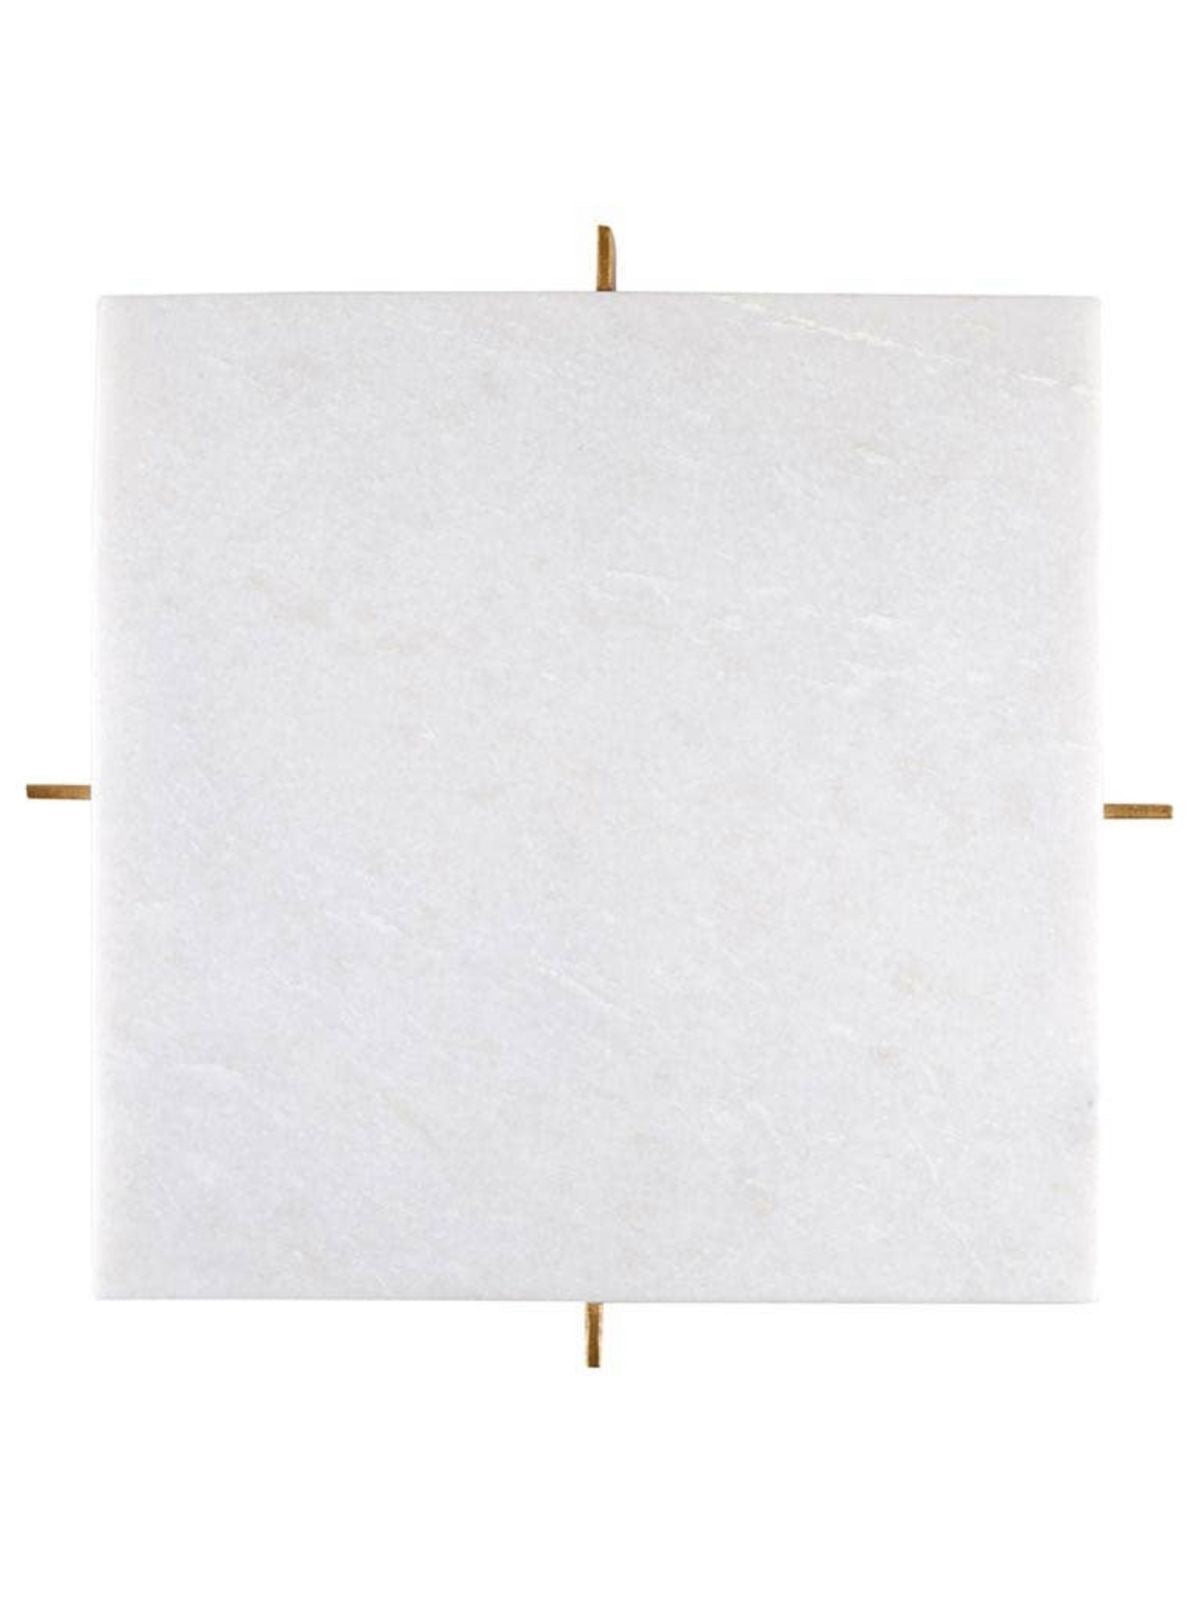 This 11 inch squared white marble tray has a removable gold metal stand.